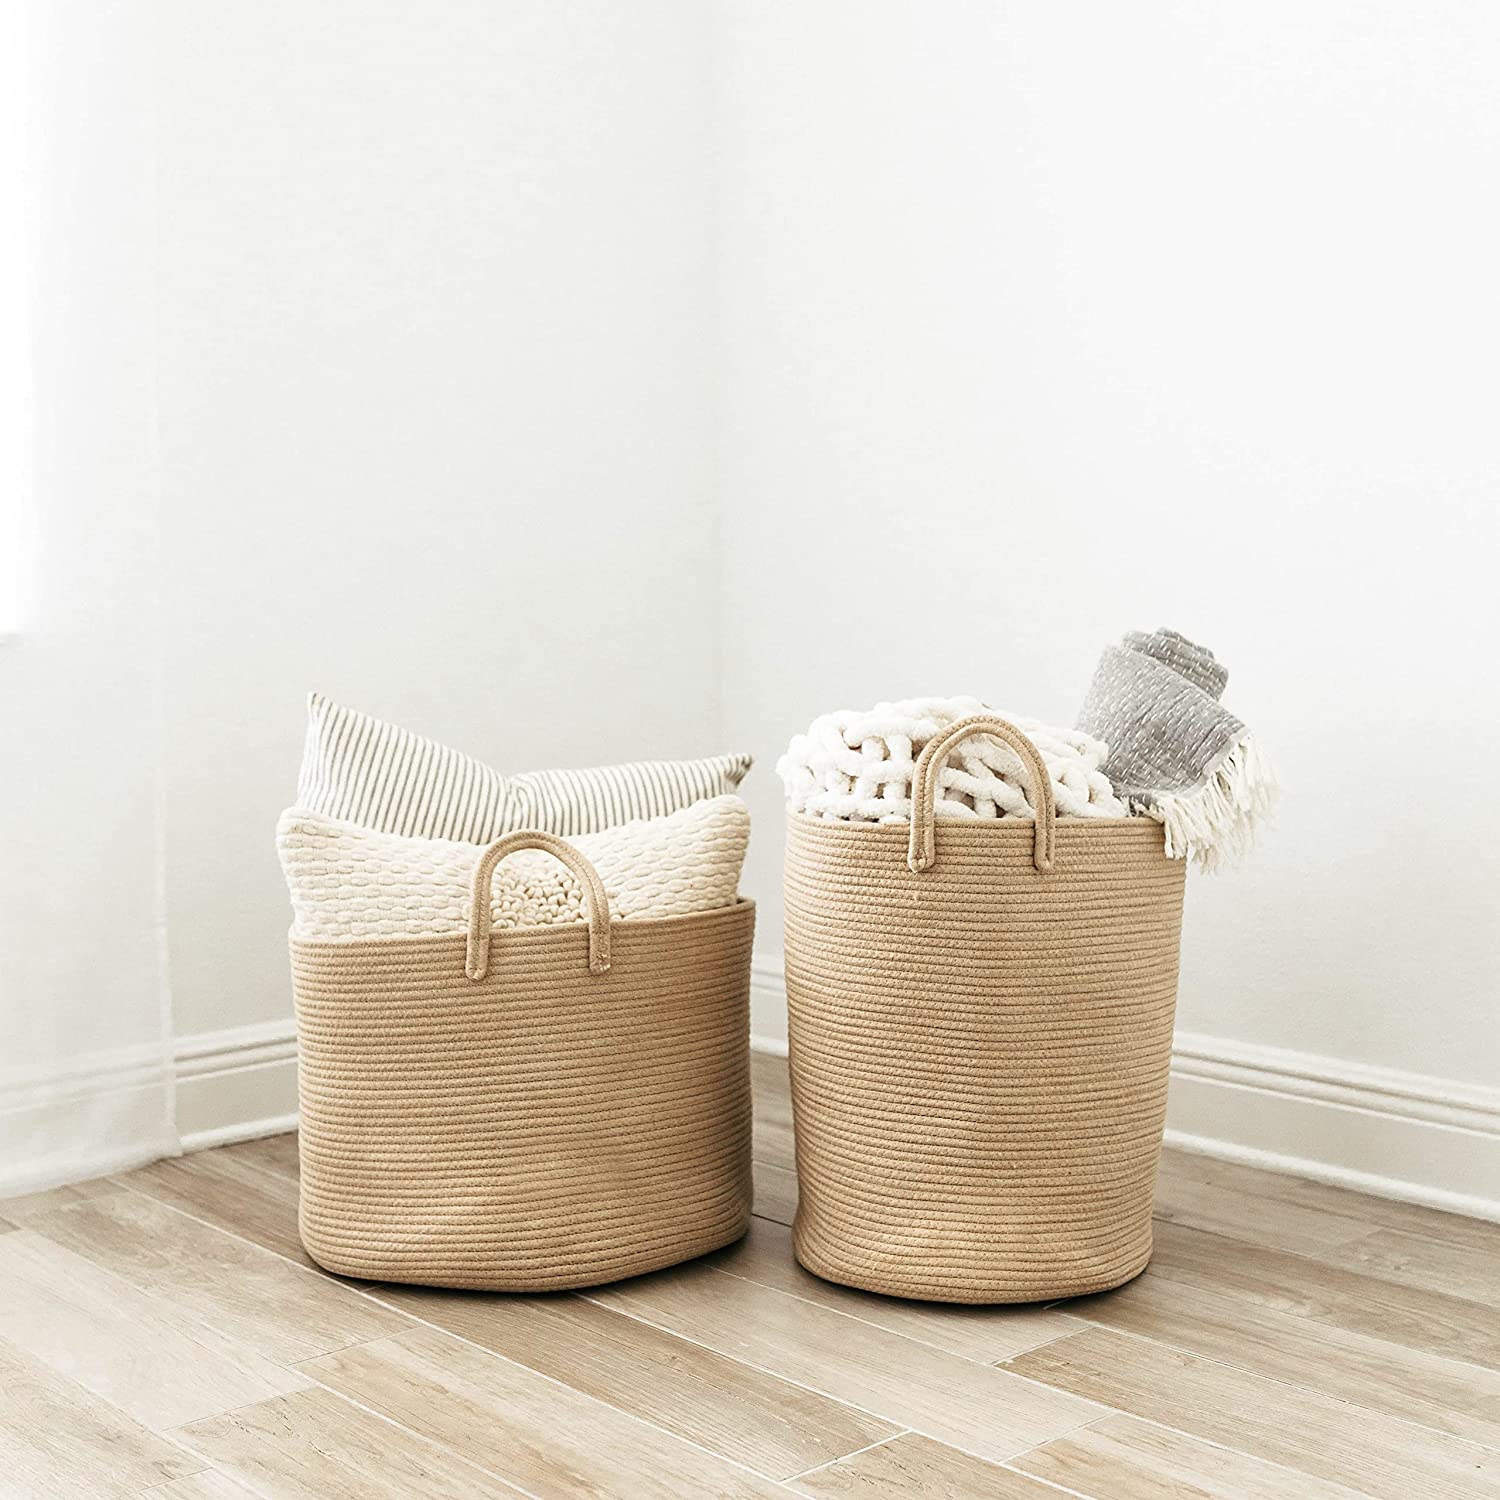 Cotton Rope Storage Baskets for Laundry